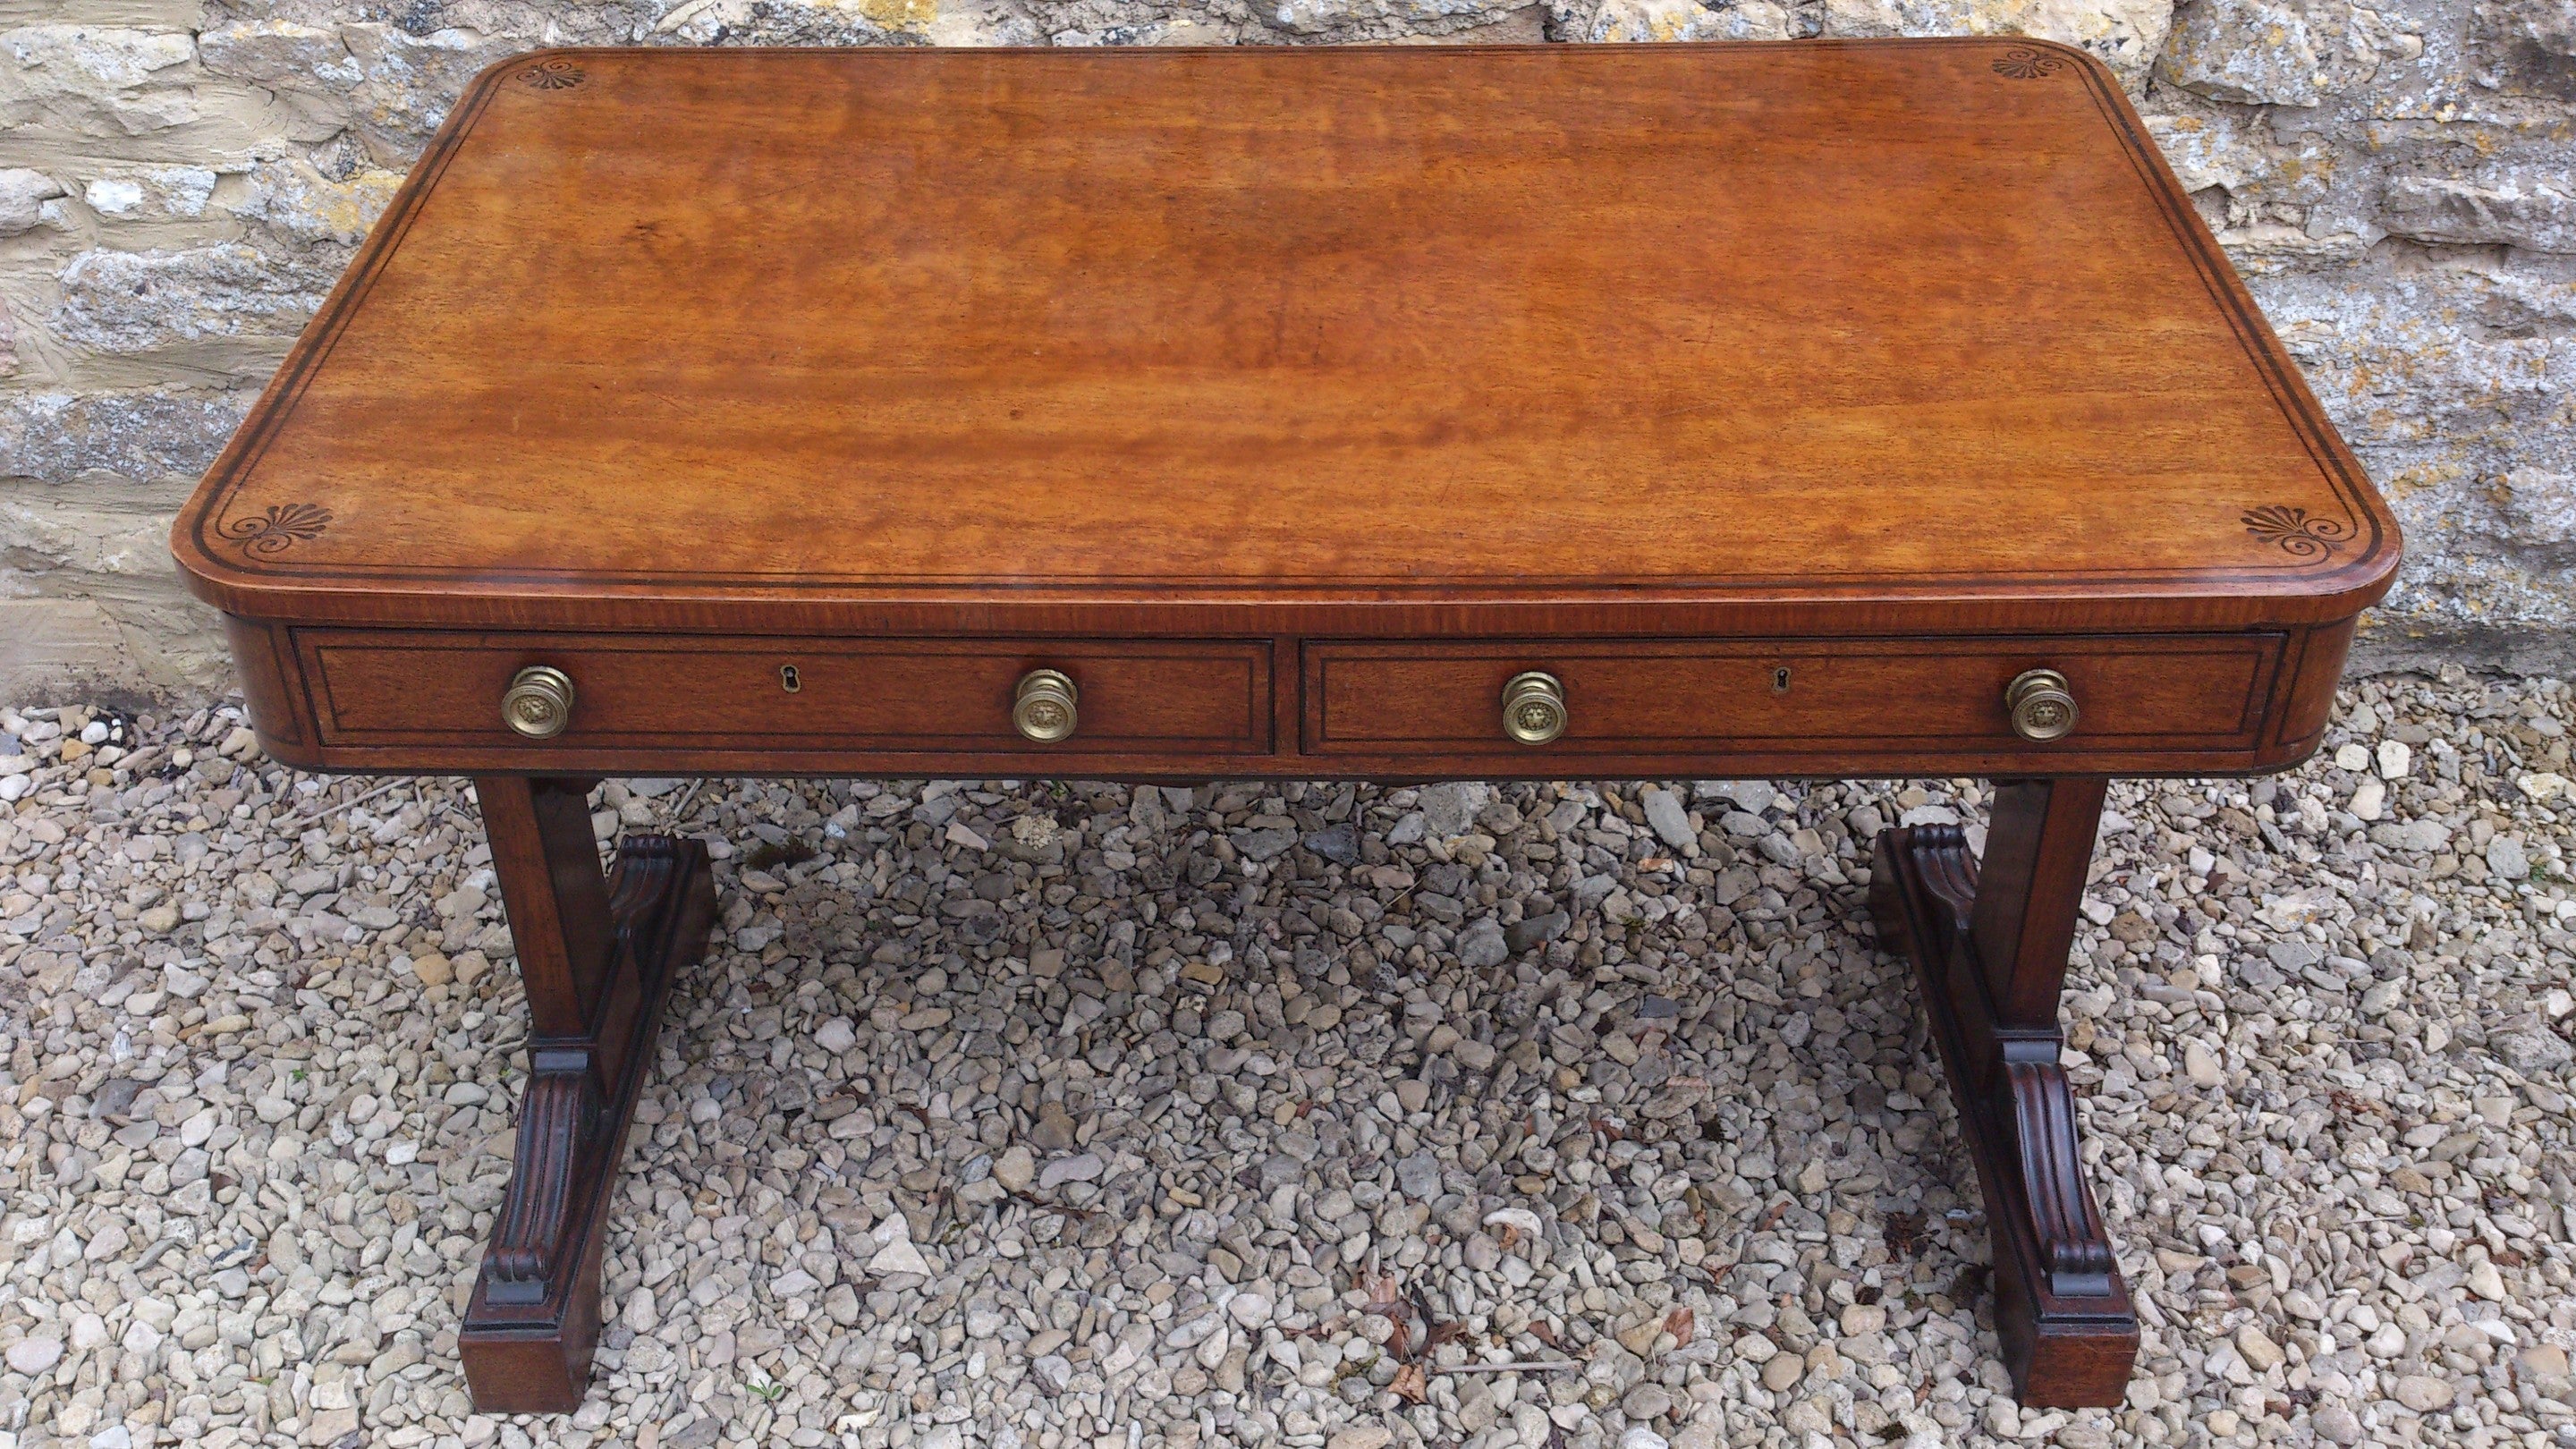 Antique Regency Sofa Table / Library Table